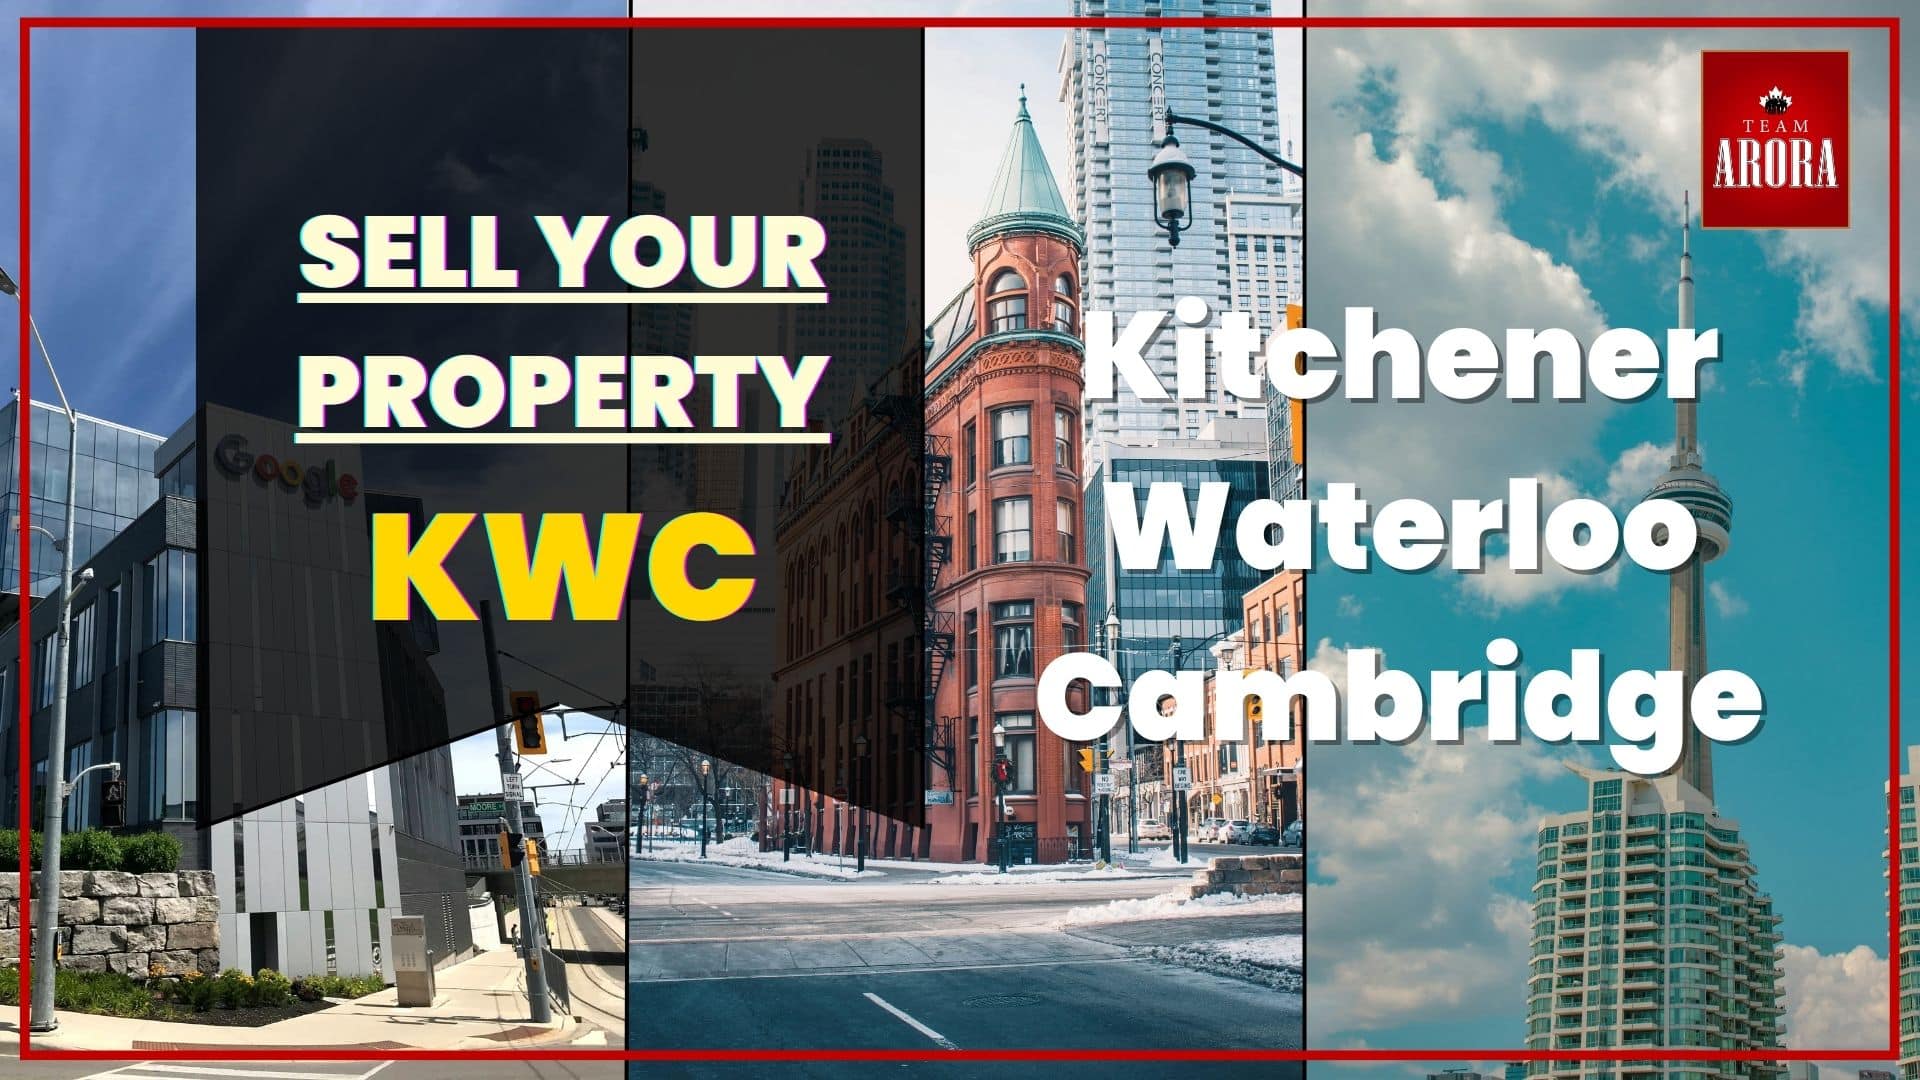 Why Should You Trust Team Arora to Sell Your Home in KWC?